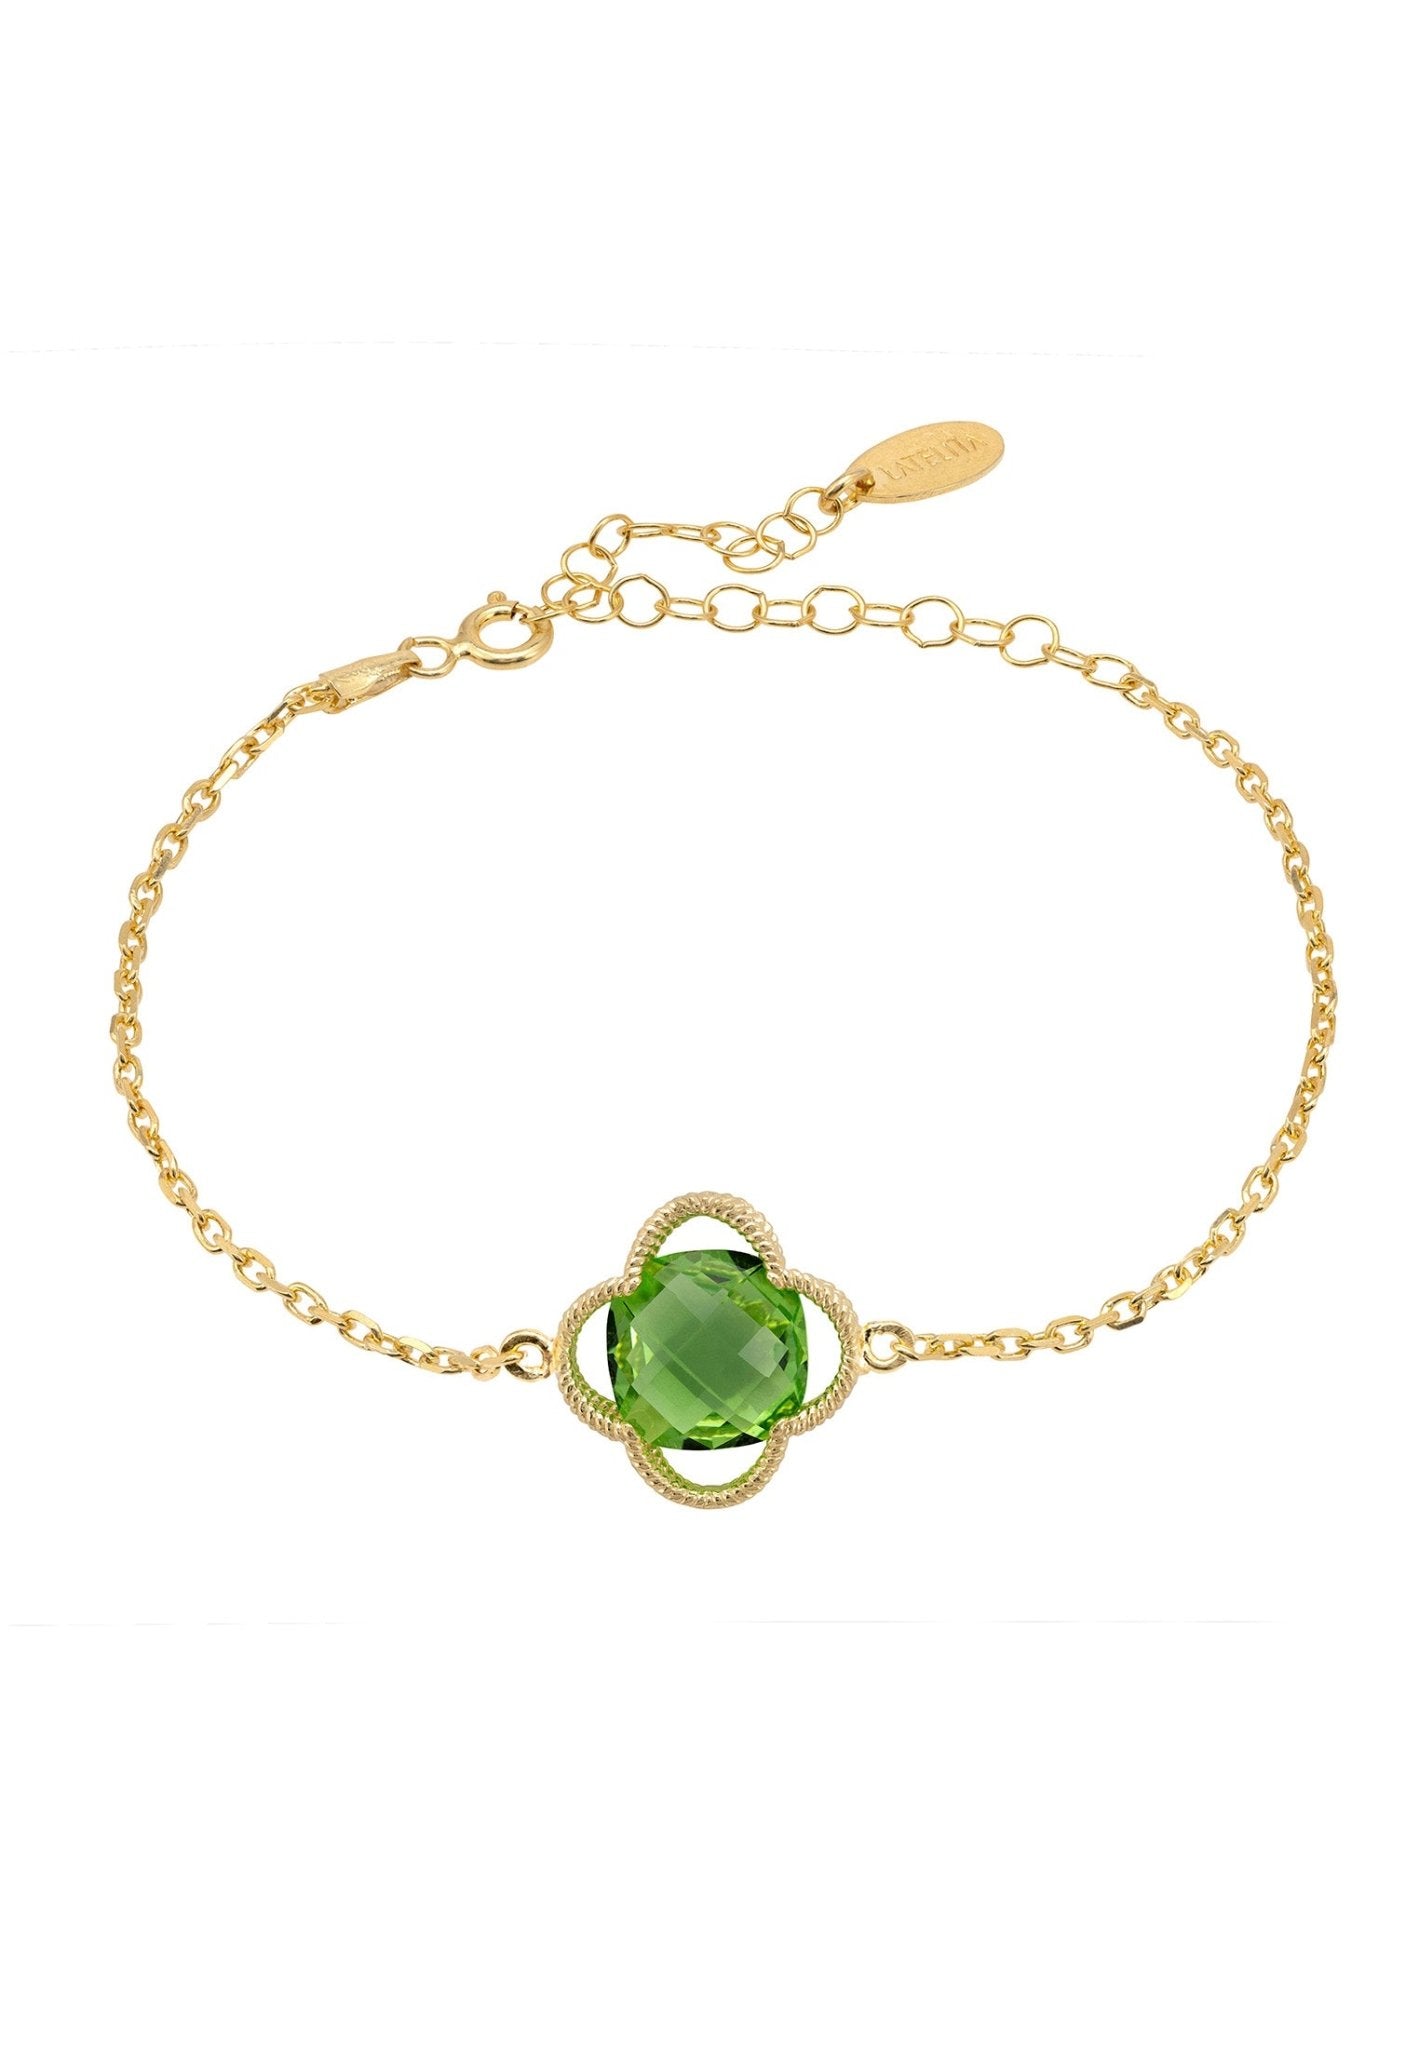 Peridot Gemstone Bracelet - S for Sparkle – My Favorite - Taking a break  from online orders. Please email us at myfavoritemerch@gmail.com if you'd  like to place an order. Thank you!